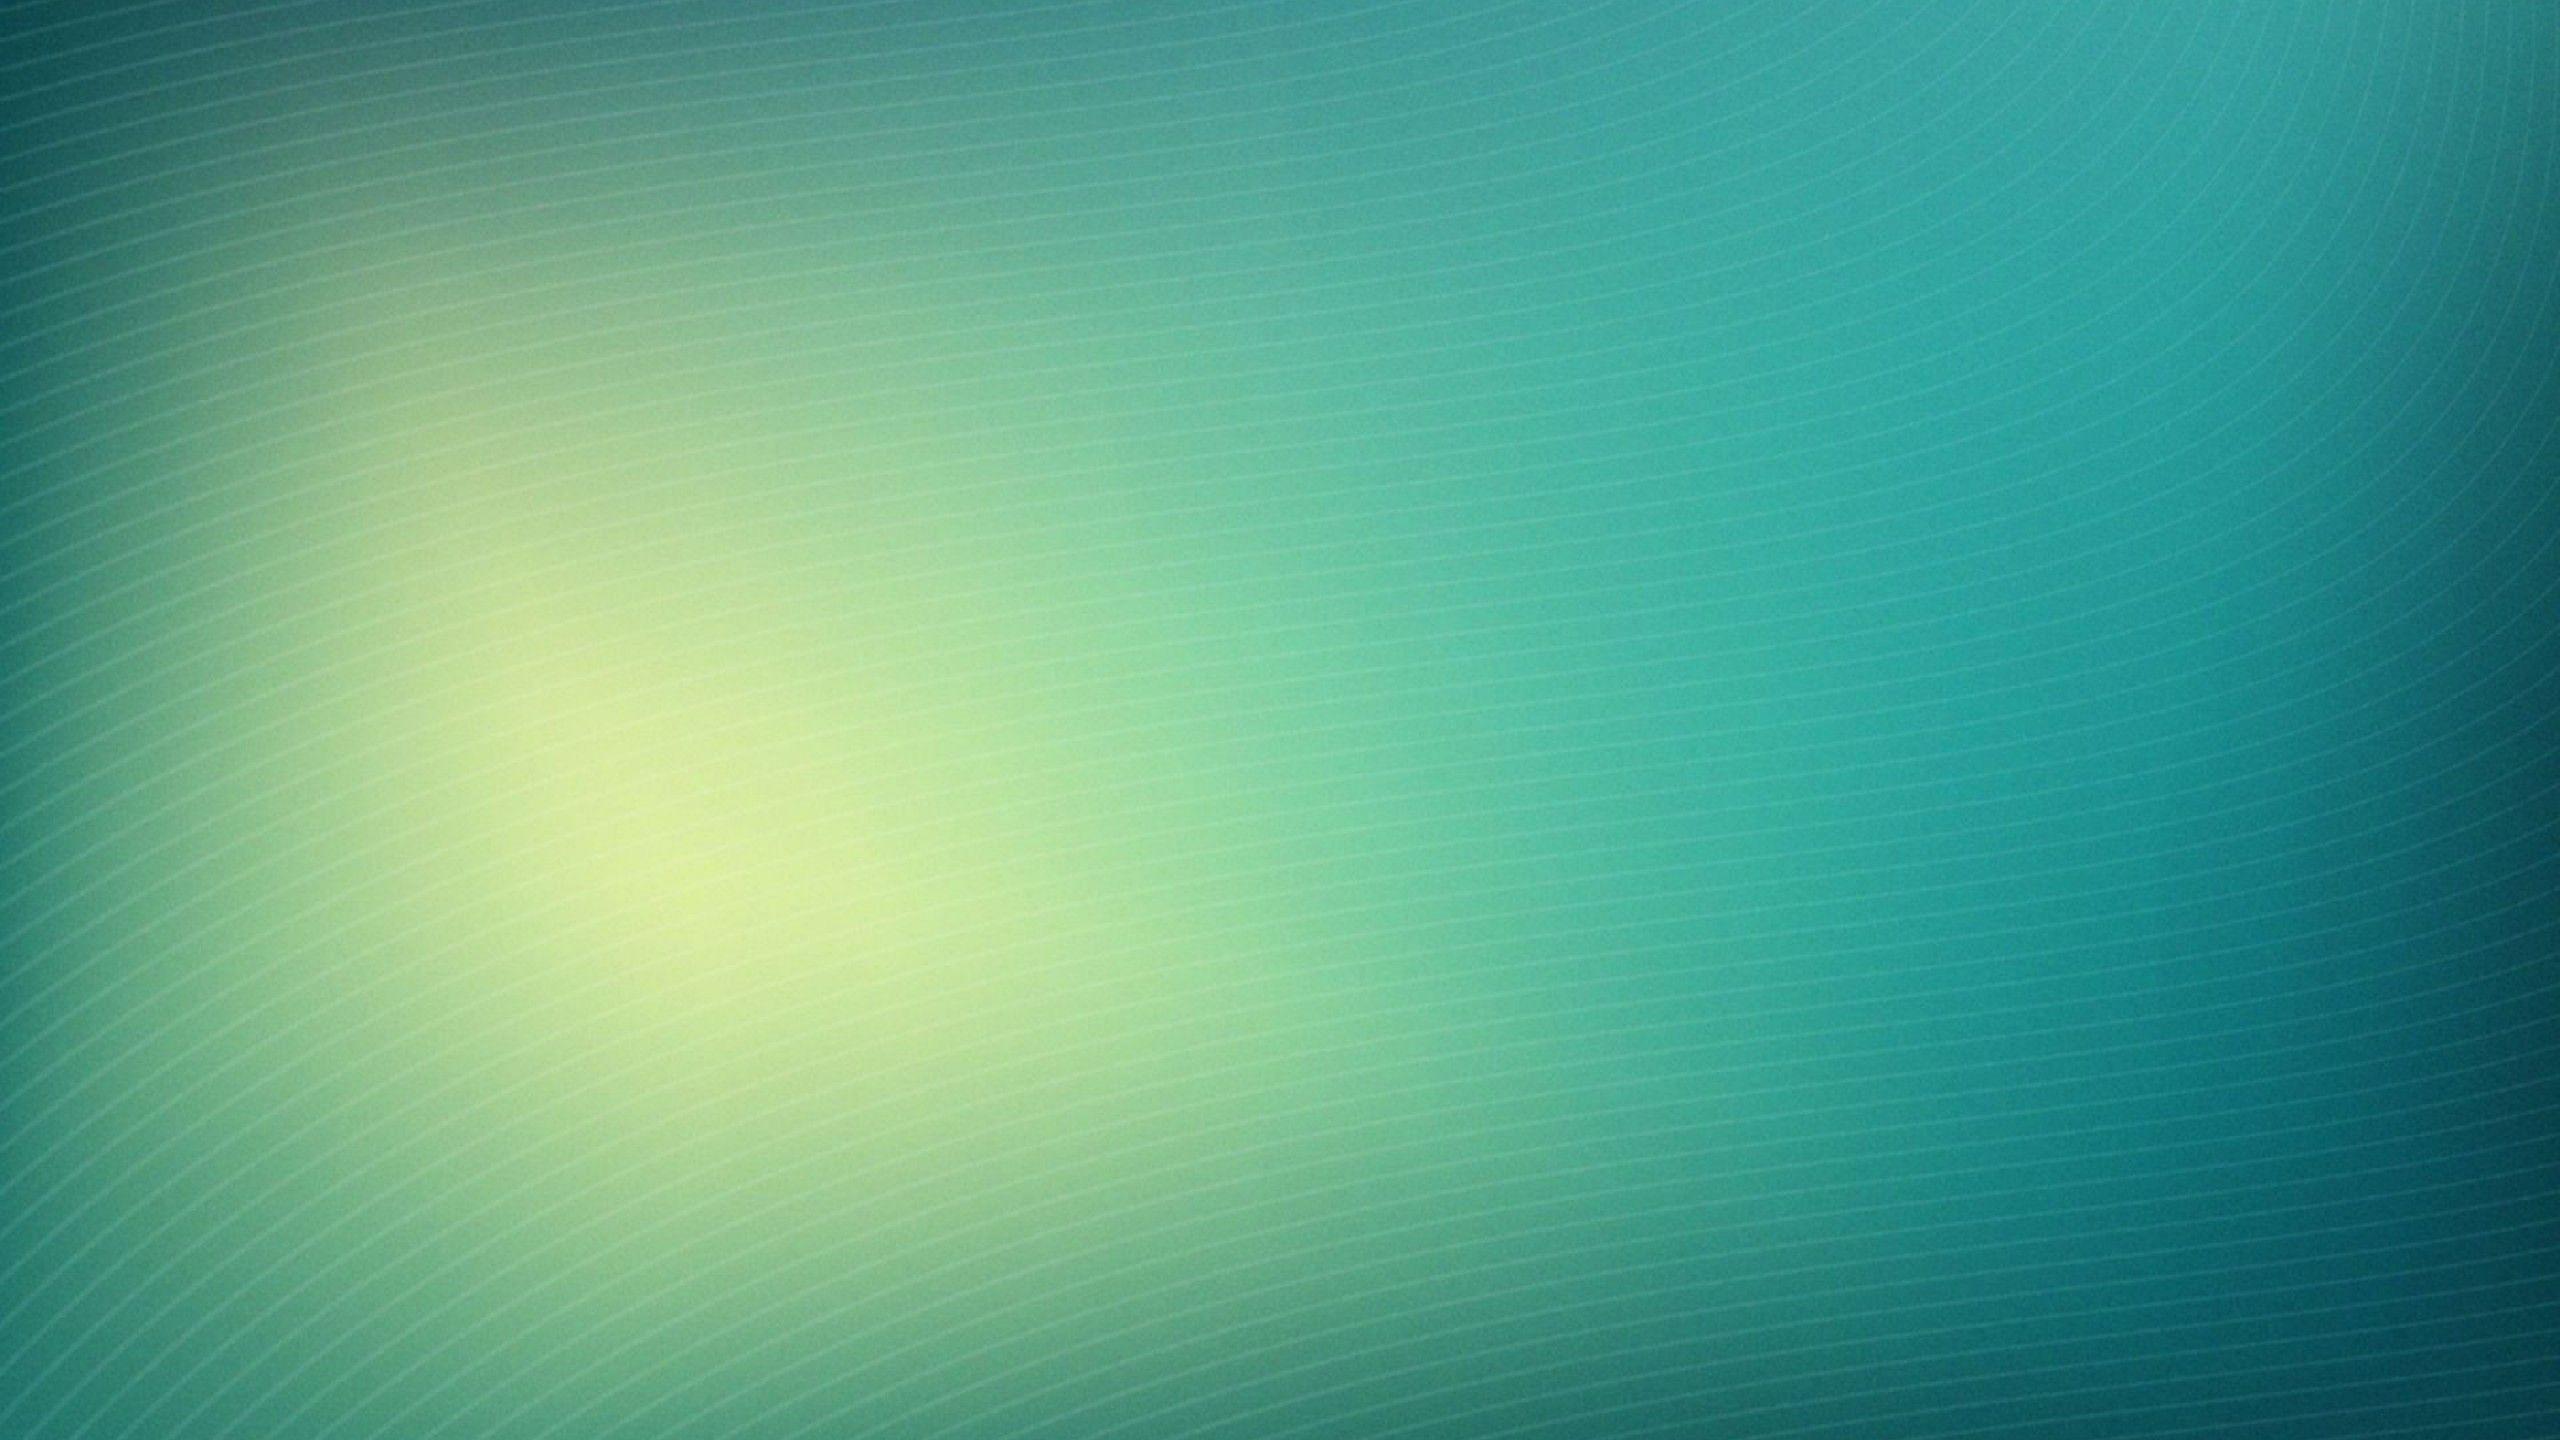 Calm Backgrounds Image 2560x1440